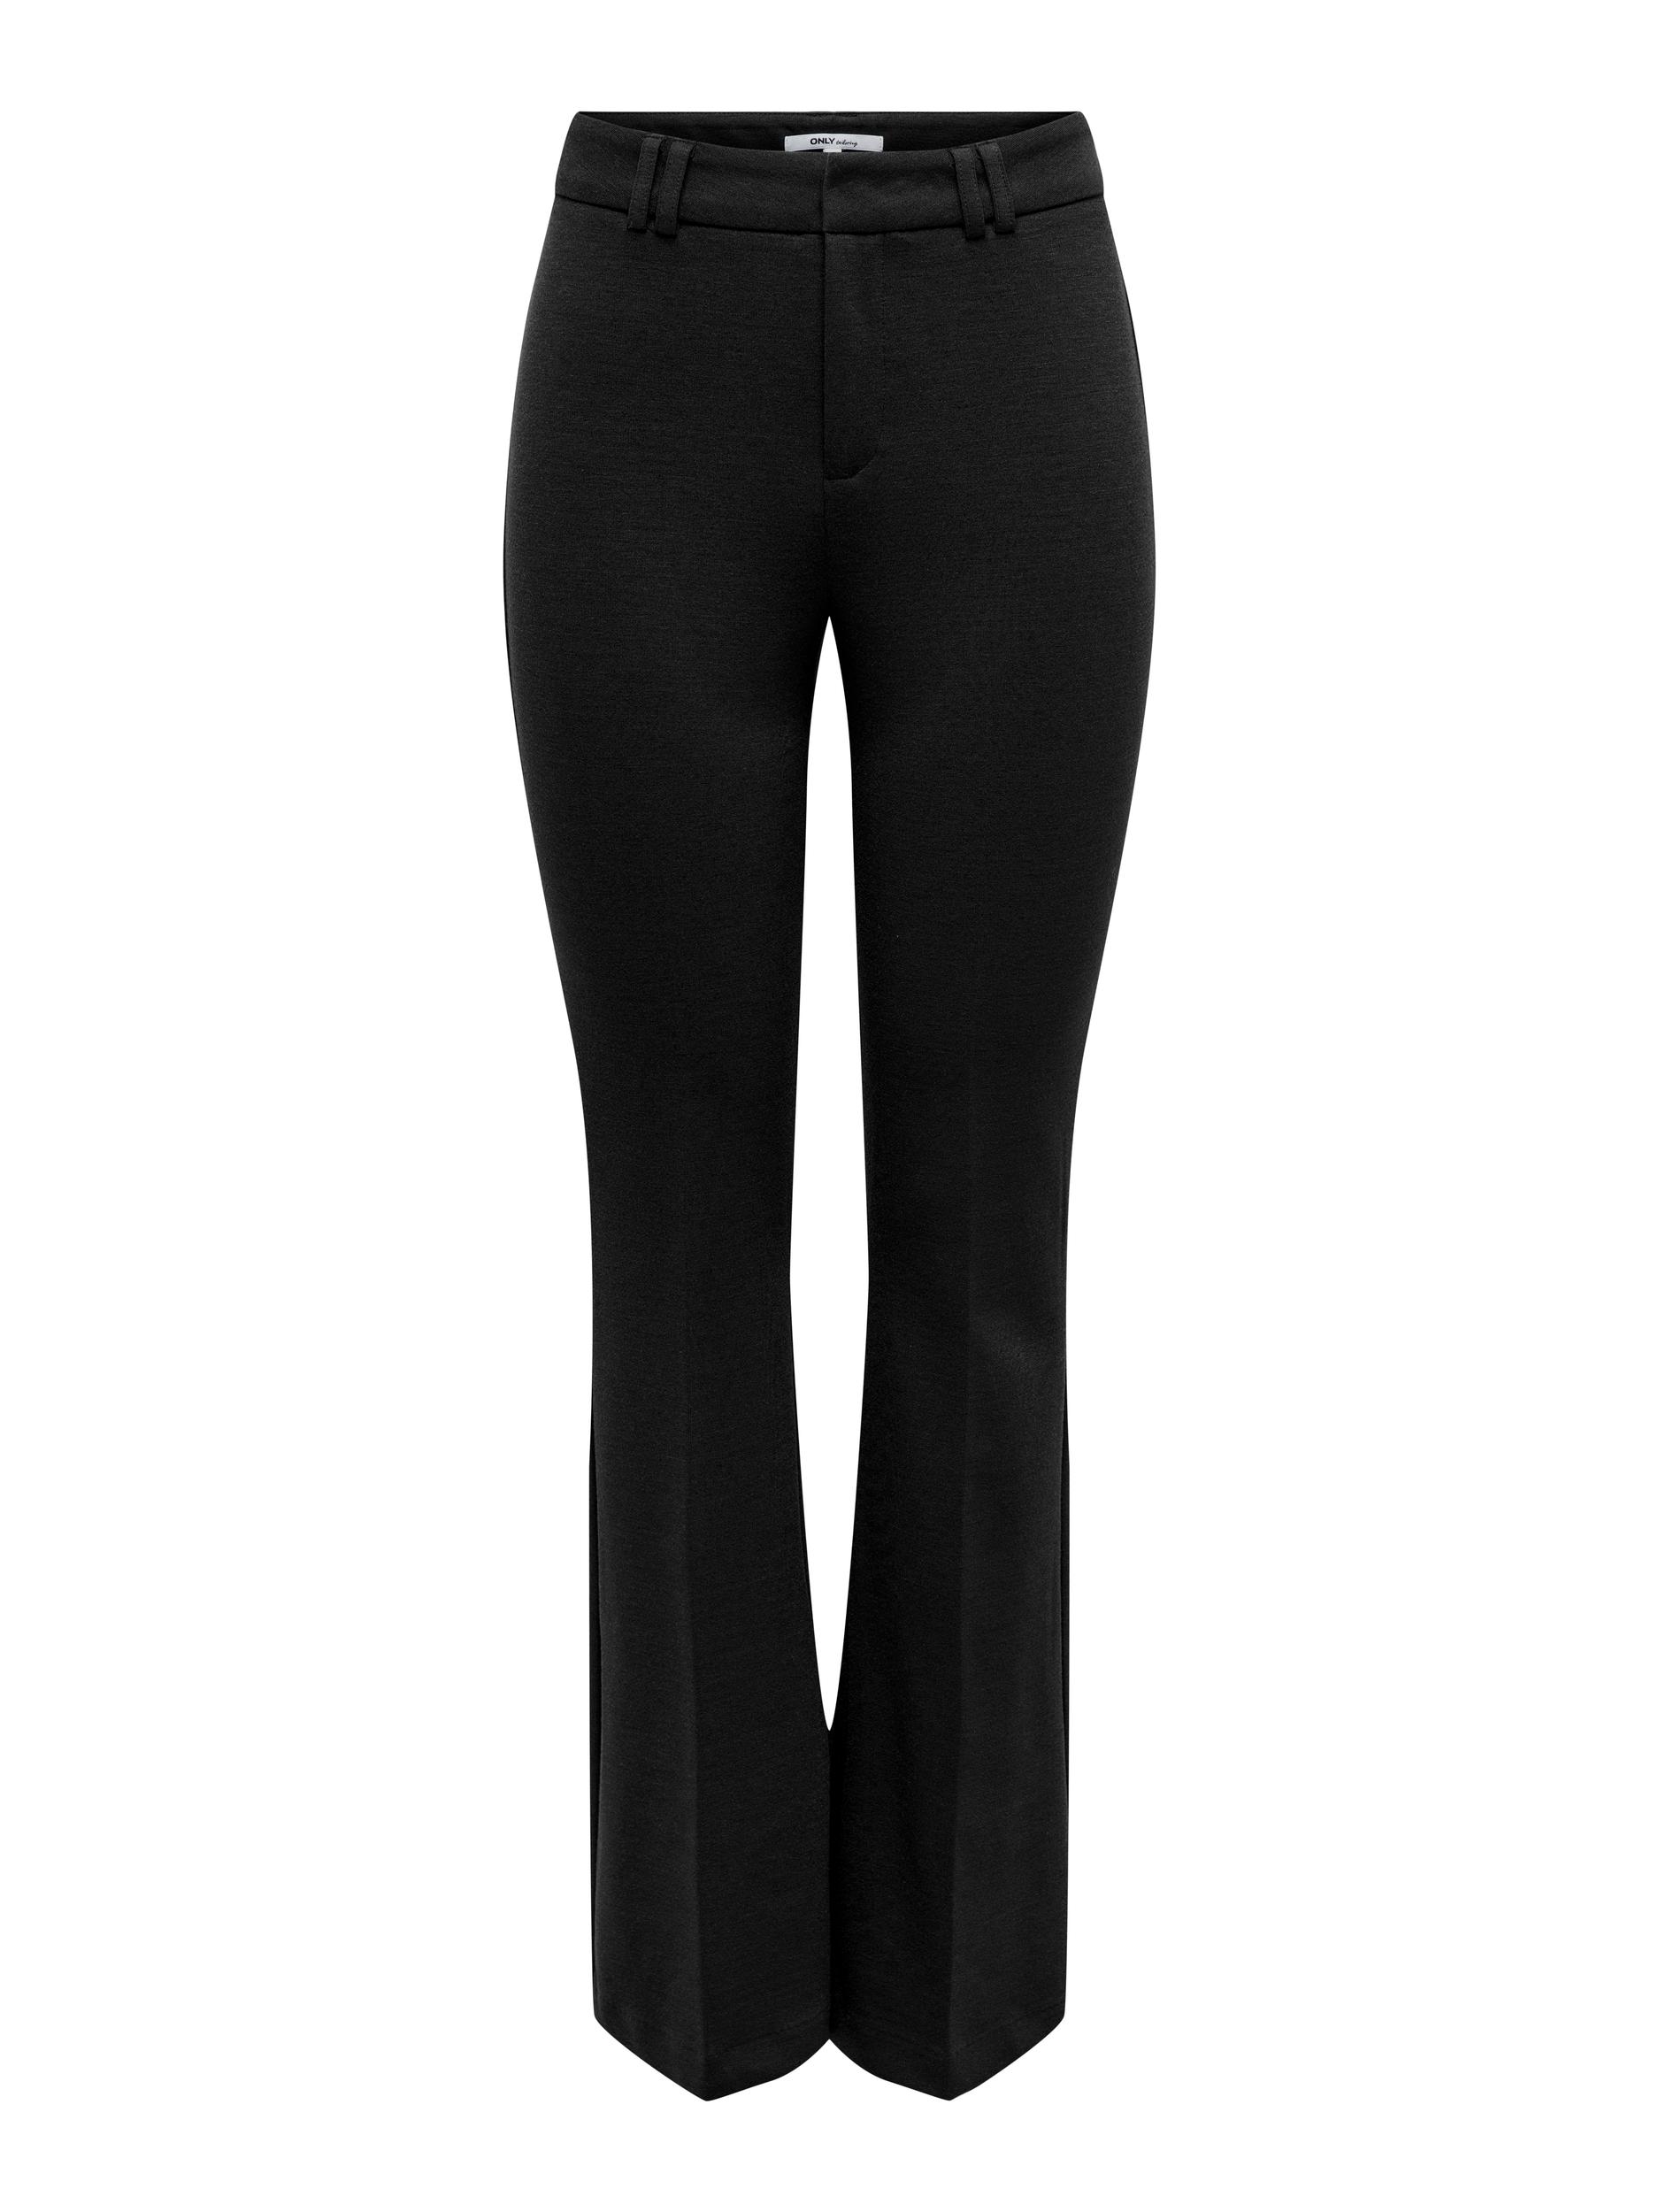 ONLY Anzughose »ONLPEACH MW FLARED PANT TLR NOOS« von Only